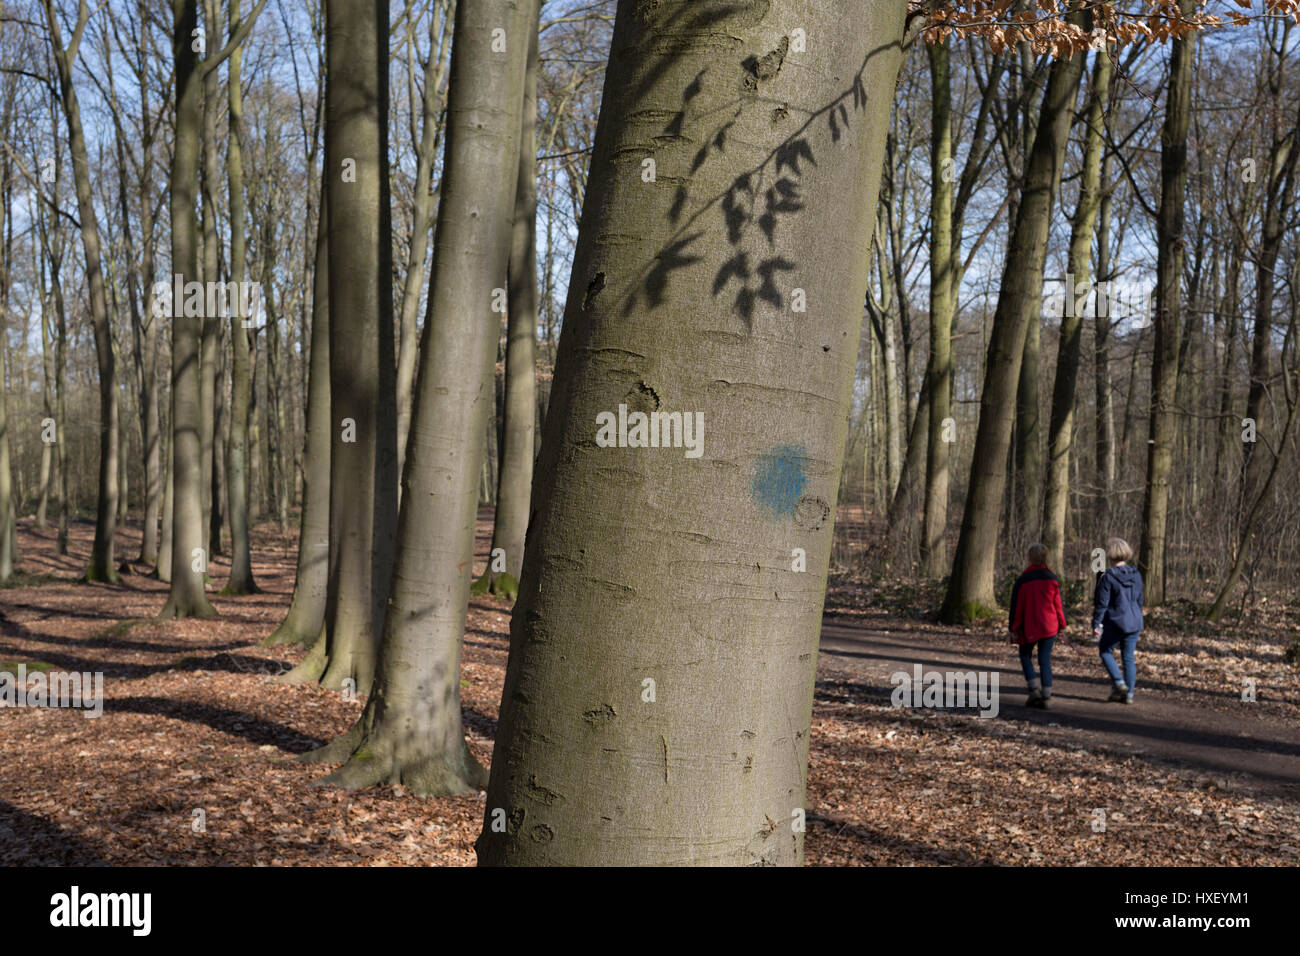 Walkers in woods that form part of the Foret de Soignes, on 25th March, in Everberg, Belgium. Forêt de Soignes or Sonian Wood is a 4,421-hectare (10,920-acre) forest that lies at the south-eastern edge of Brussels, Belgium. The forest lies in the Flemish municipalities of Sint-Genesius-Rode, Hoeilaart, Overijse, and Tervuren, in the Brussels-Capital Region municipalities of Uccle, Watermael-Boitsfort, Auderghem, and Woluwe-Saint-Pierre, and in the Walloon towns of La Hulpe and Waterloo. Thus, it stretches out over the three Belgian Regions. Stock Photo